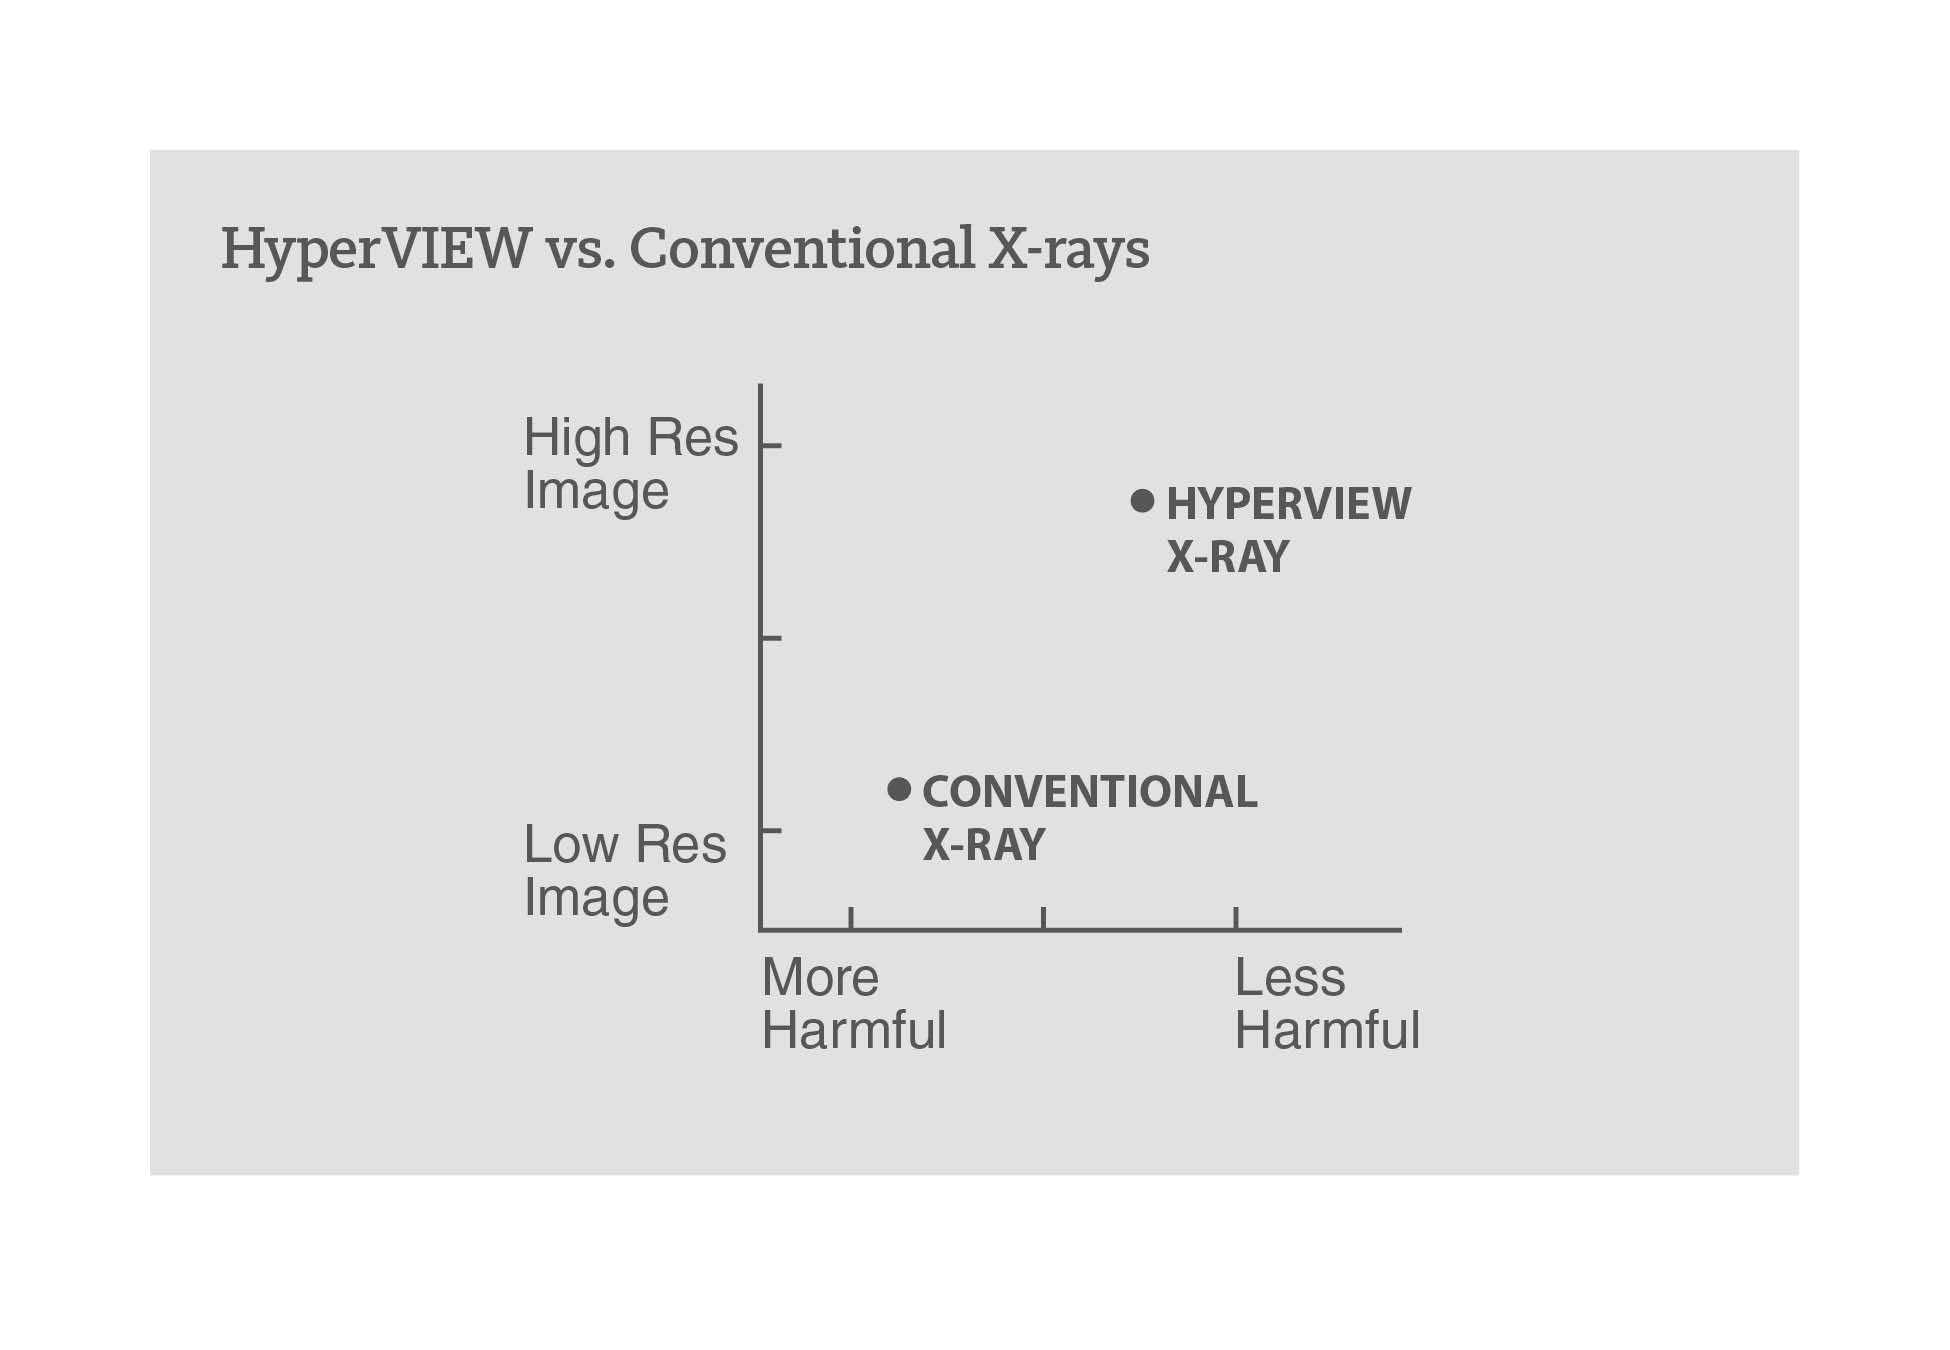 HYPERview is an advanced x-ray platform that provides a clearer, high-resolution image and is not as harmful as conventional x-ray machines.